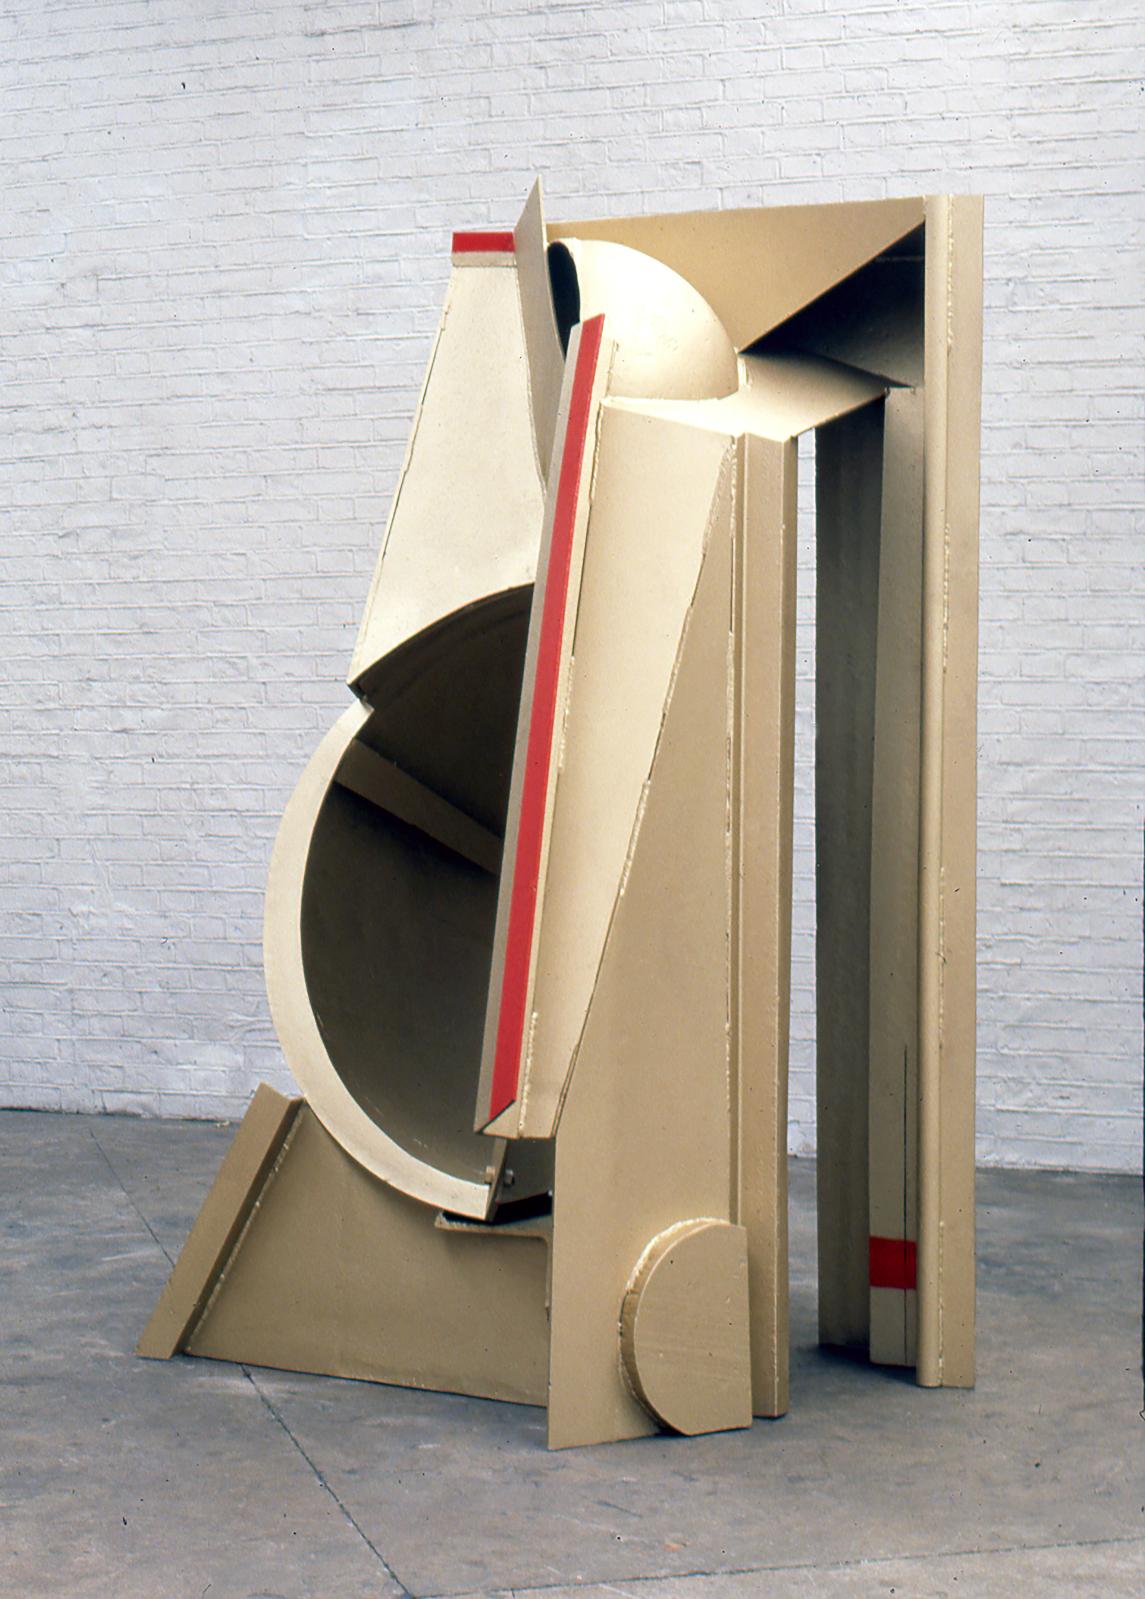 Anthony Caro. More Real, More Felt